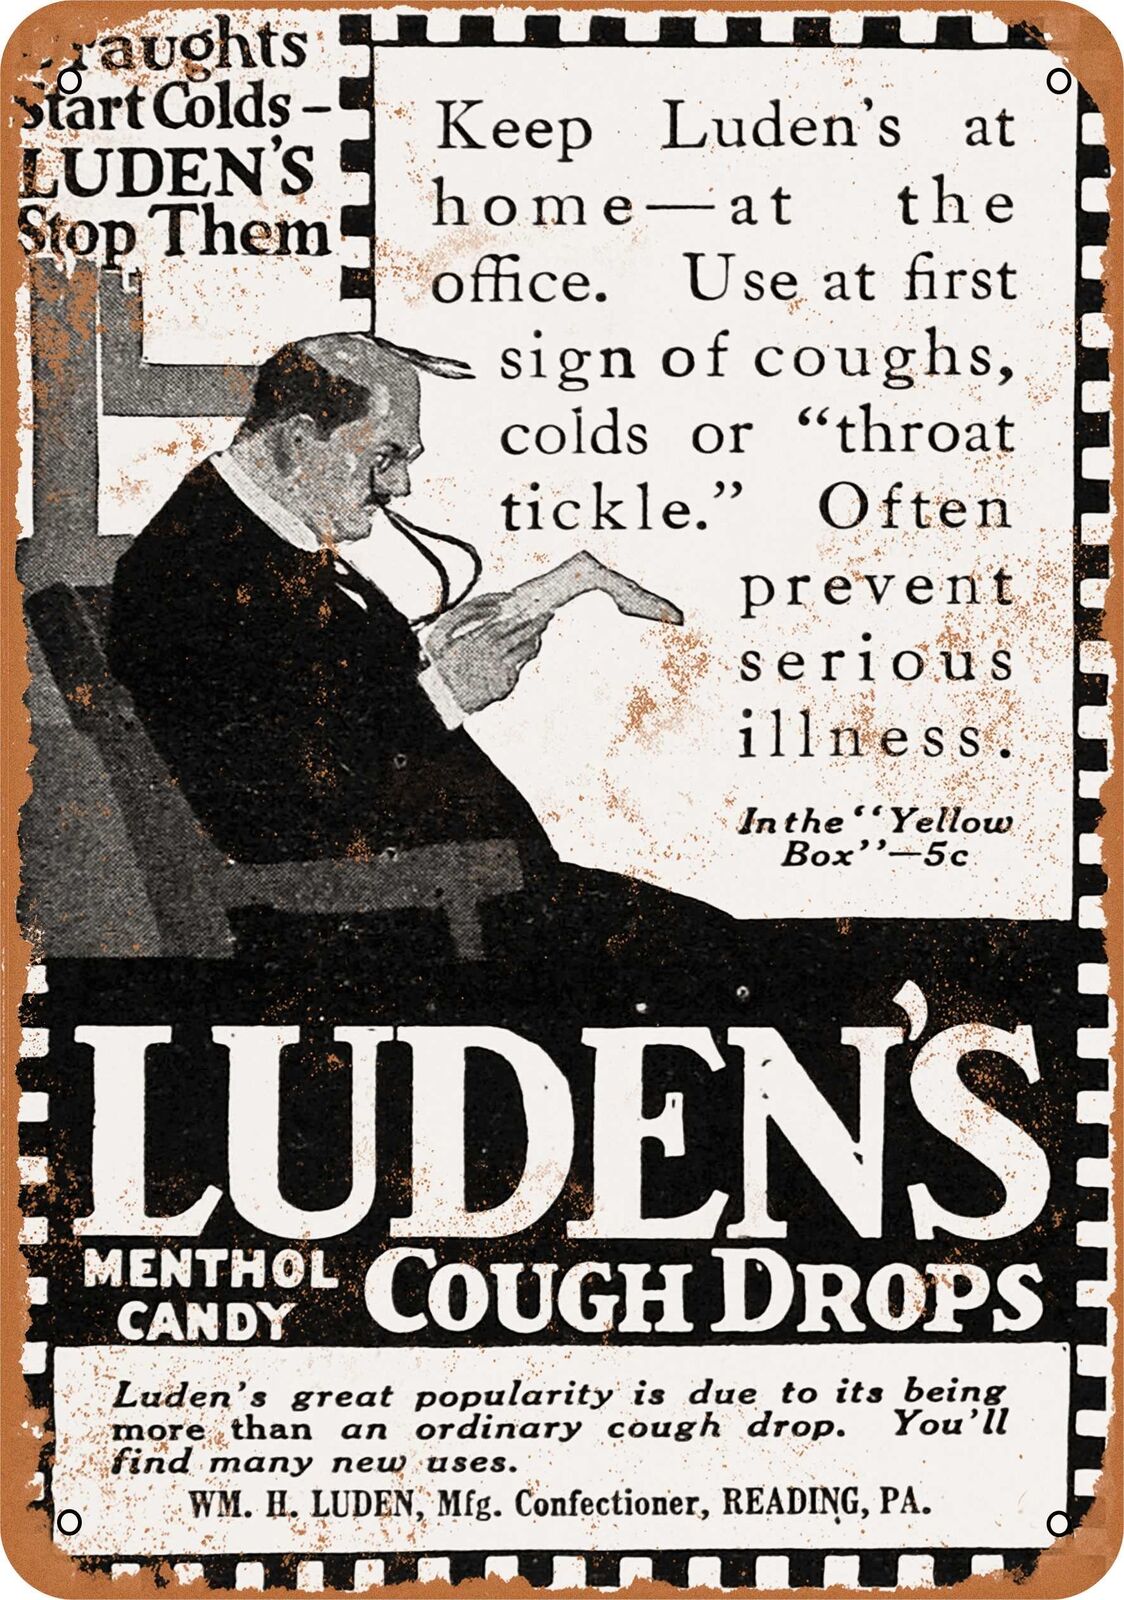 Metal Sign - 1916 Luden's Cough Drops - Vintage Look Reproduction